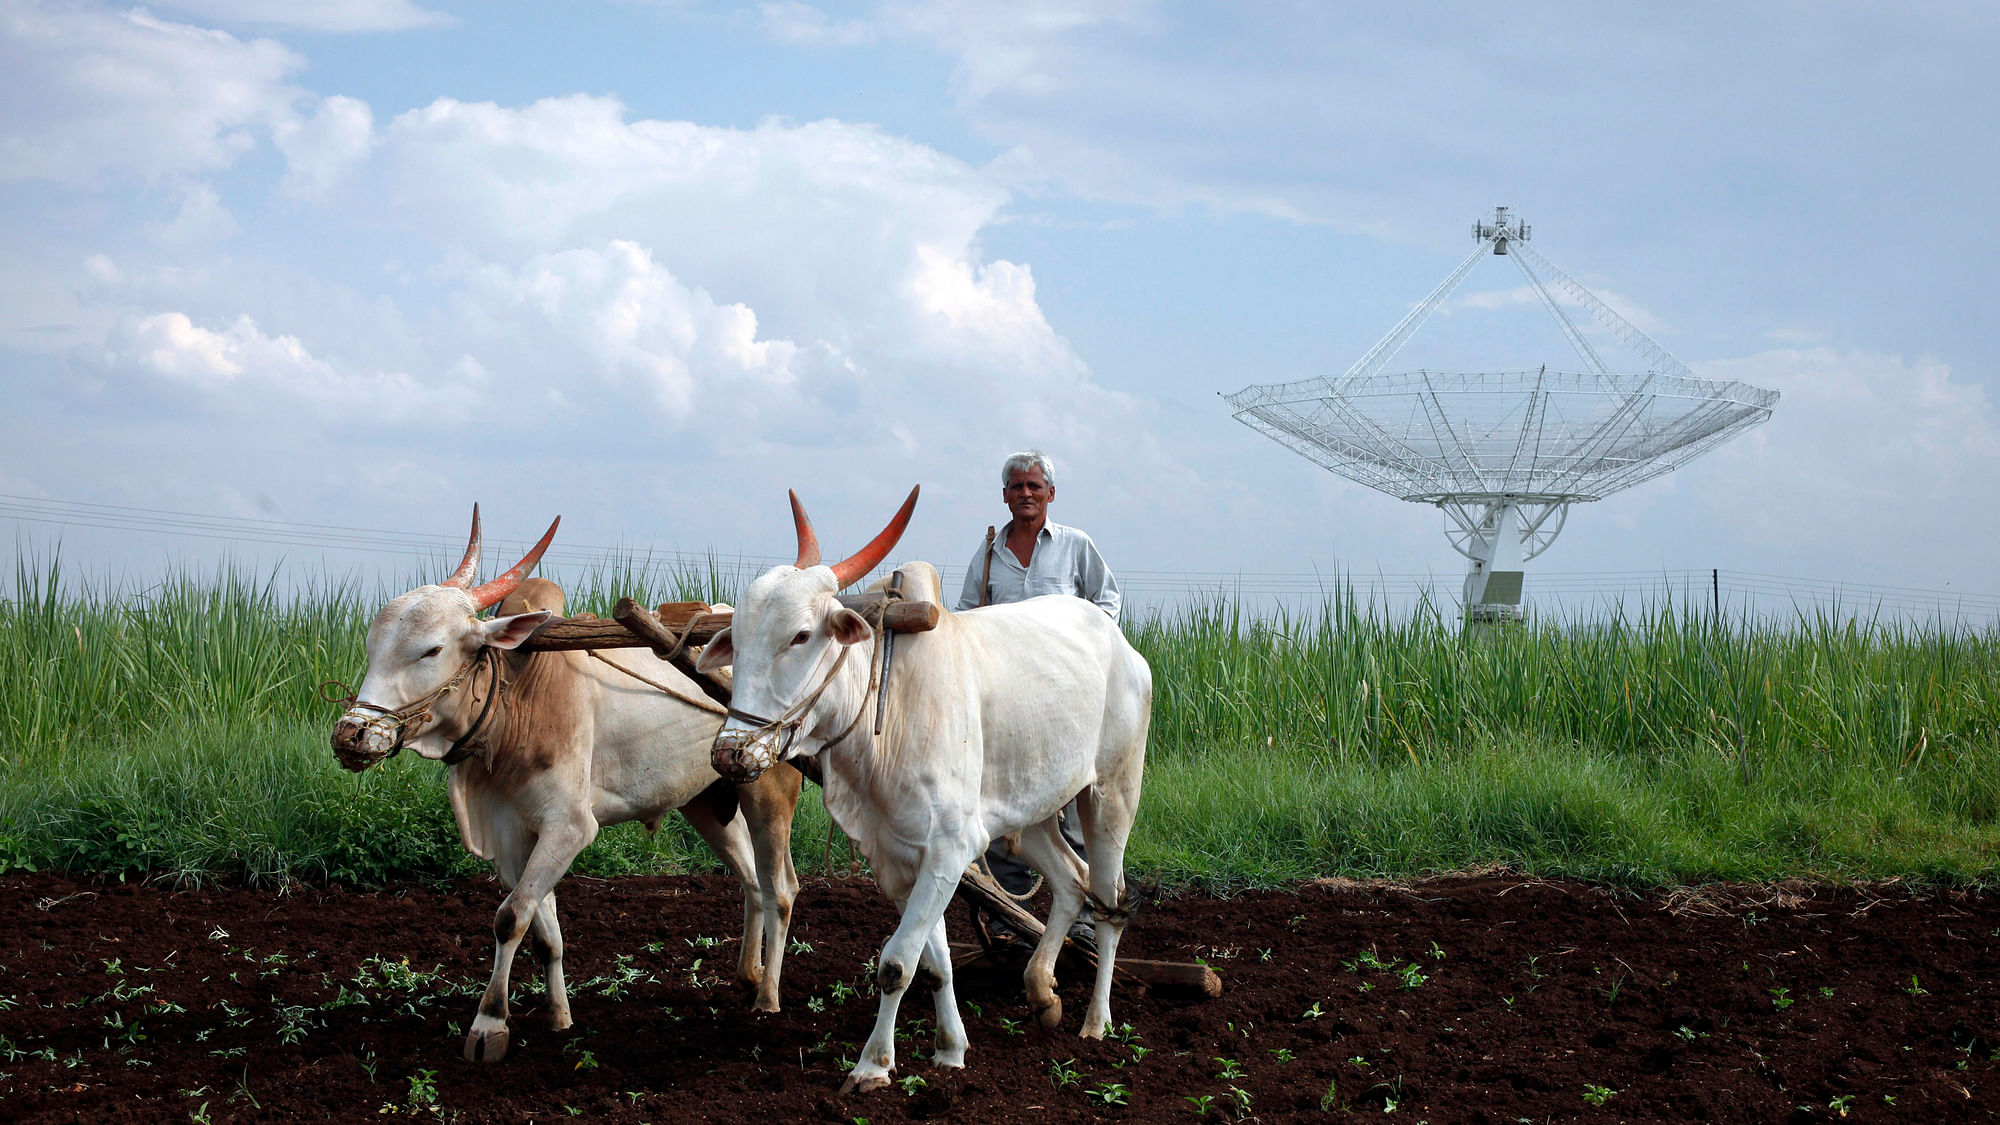 

A farmer uses his oxen to till his land in front of a satellite dish set up in an adjacent field.&nbsp;